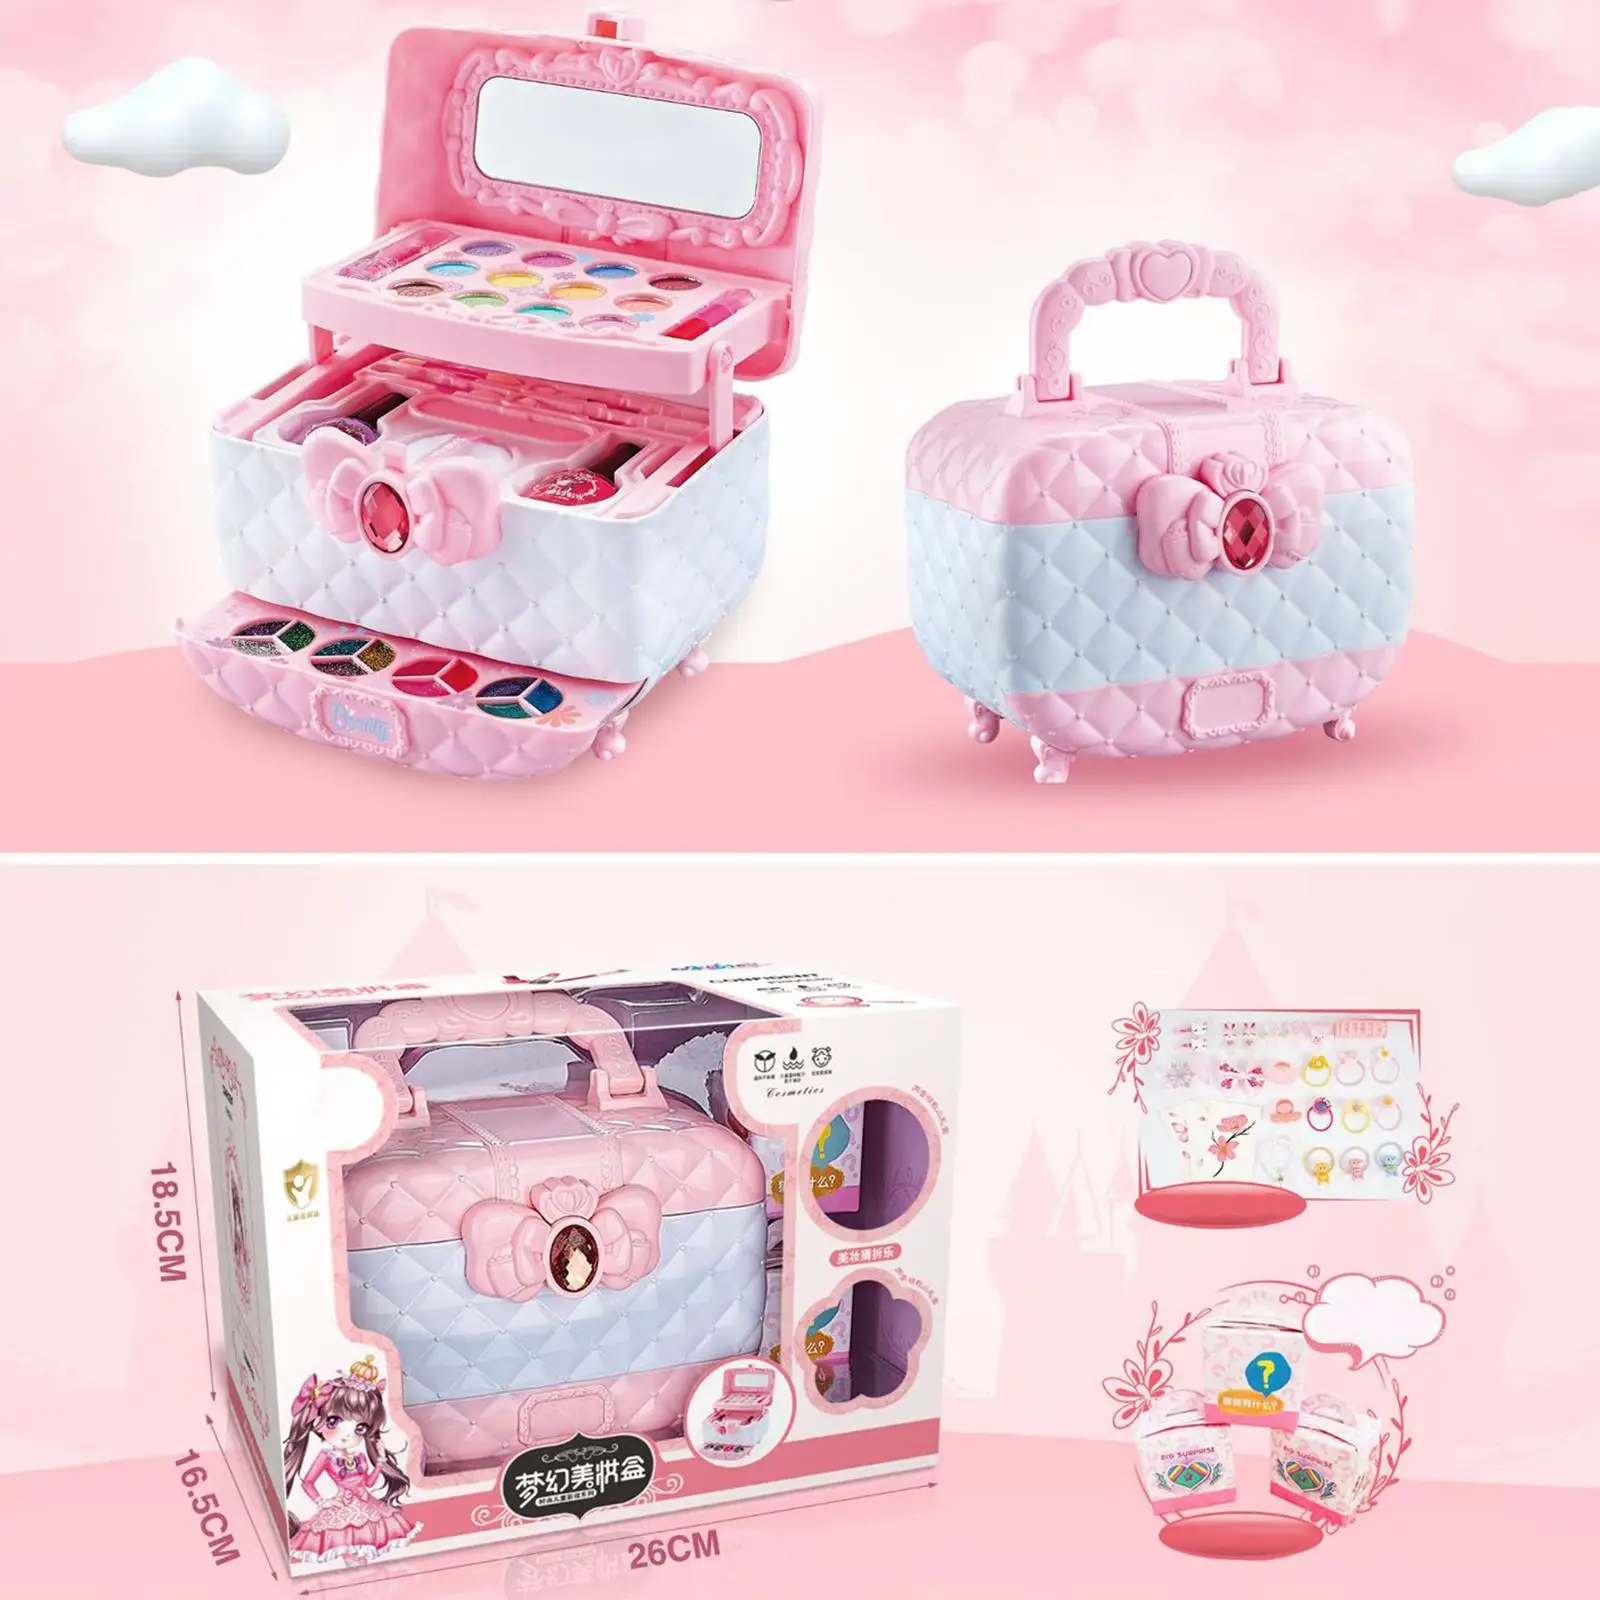 Makeup Vanity Toy Princess Toy with Cosmetic Case with Mirror Kids Makeup Set for Kids Girls Children Toddlers Birthday Gifts